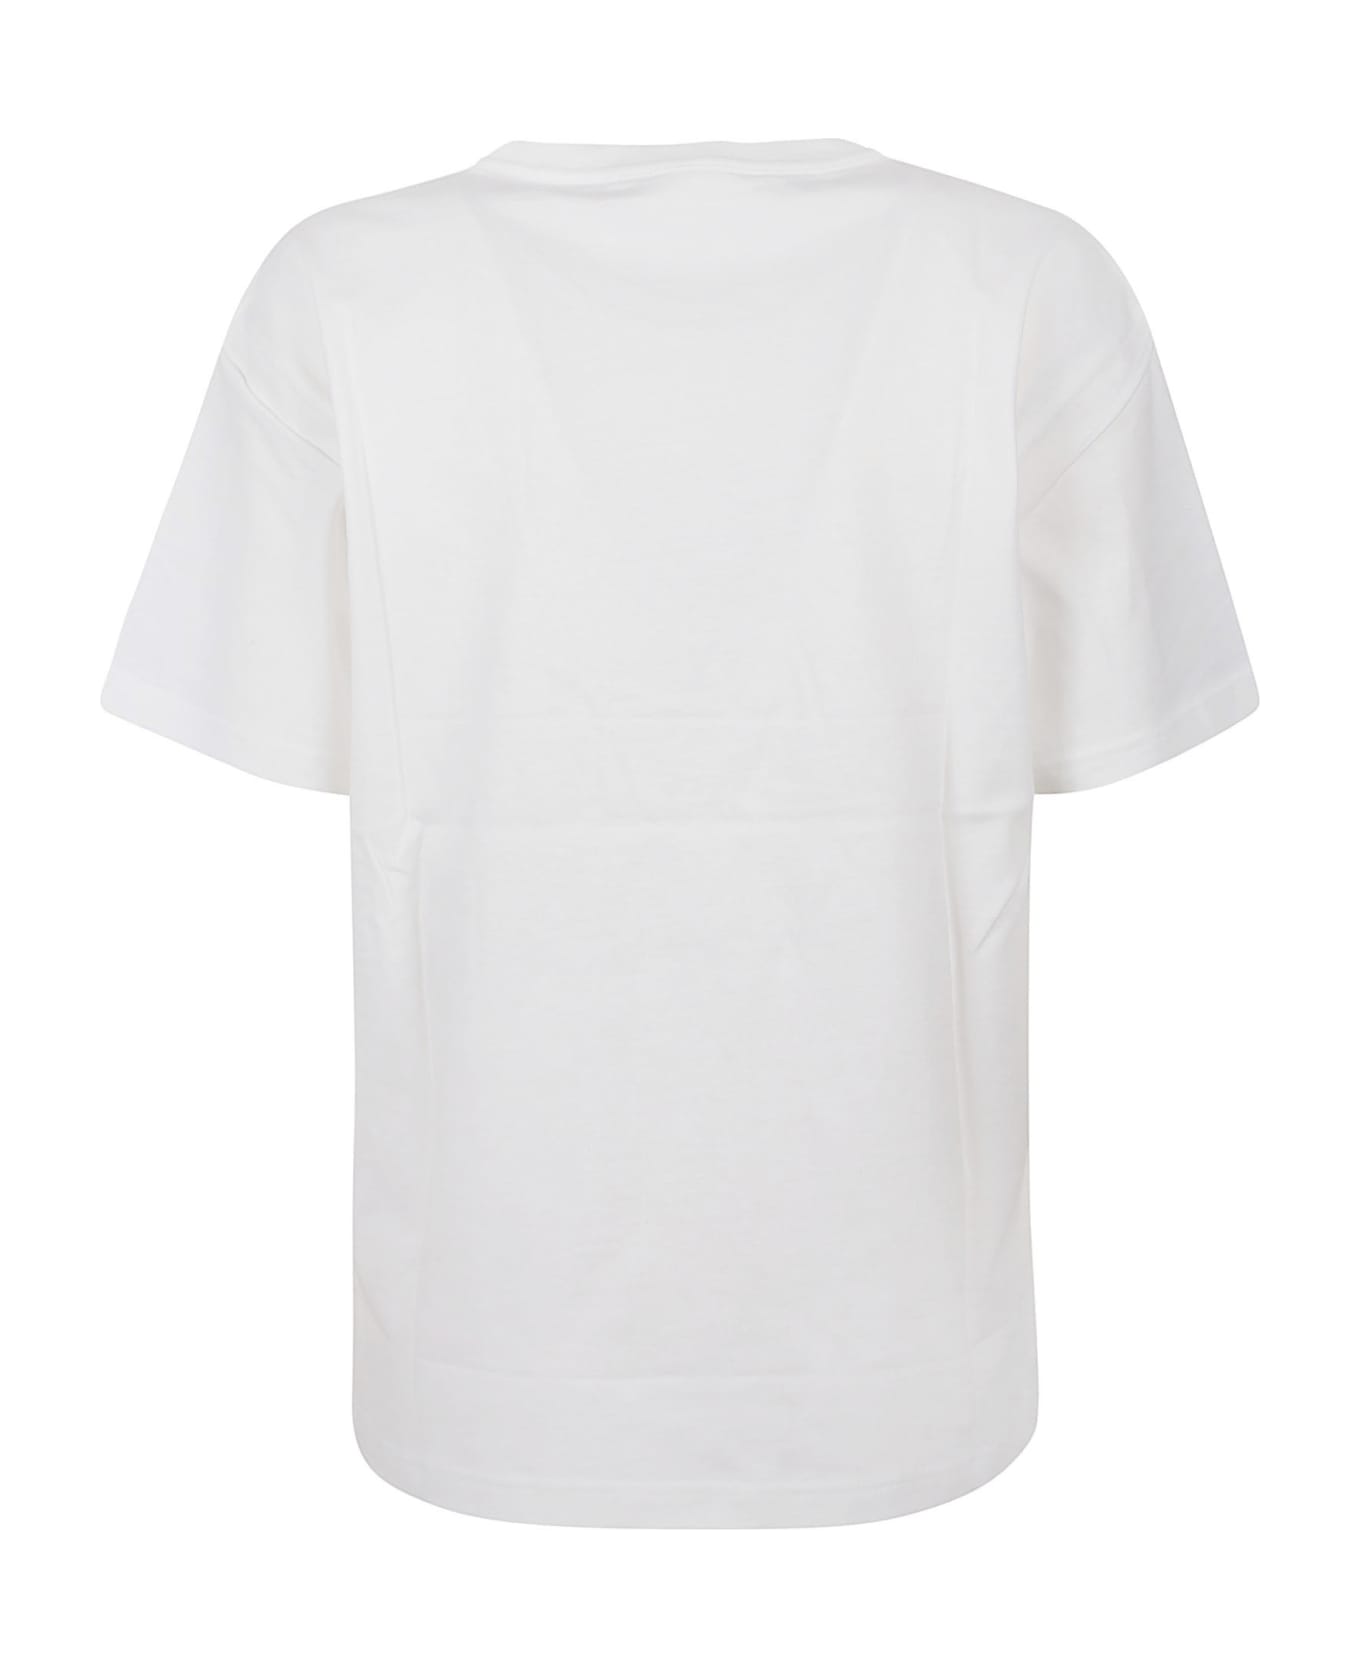 T by Alexander Wang Puff Logo Bound Neck Essential T-shirt - White